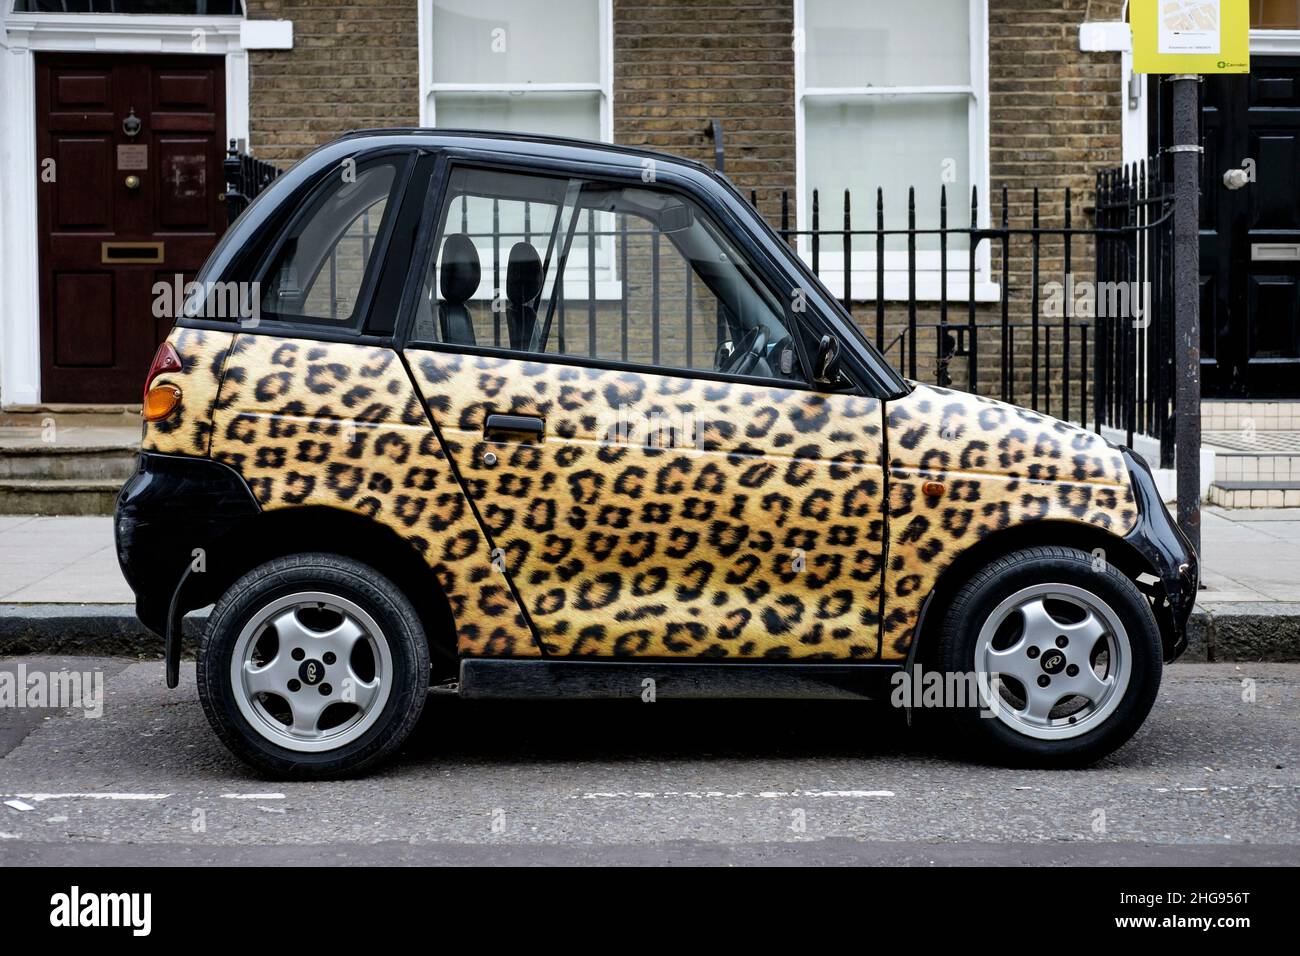 A Reva G-Wiz electric car with leopard print design panelling parked on street, London, UK Stock Photo